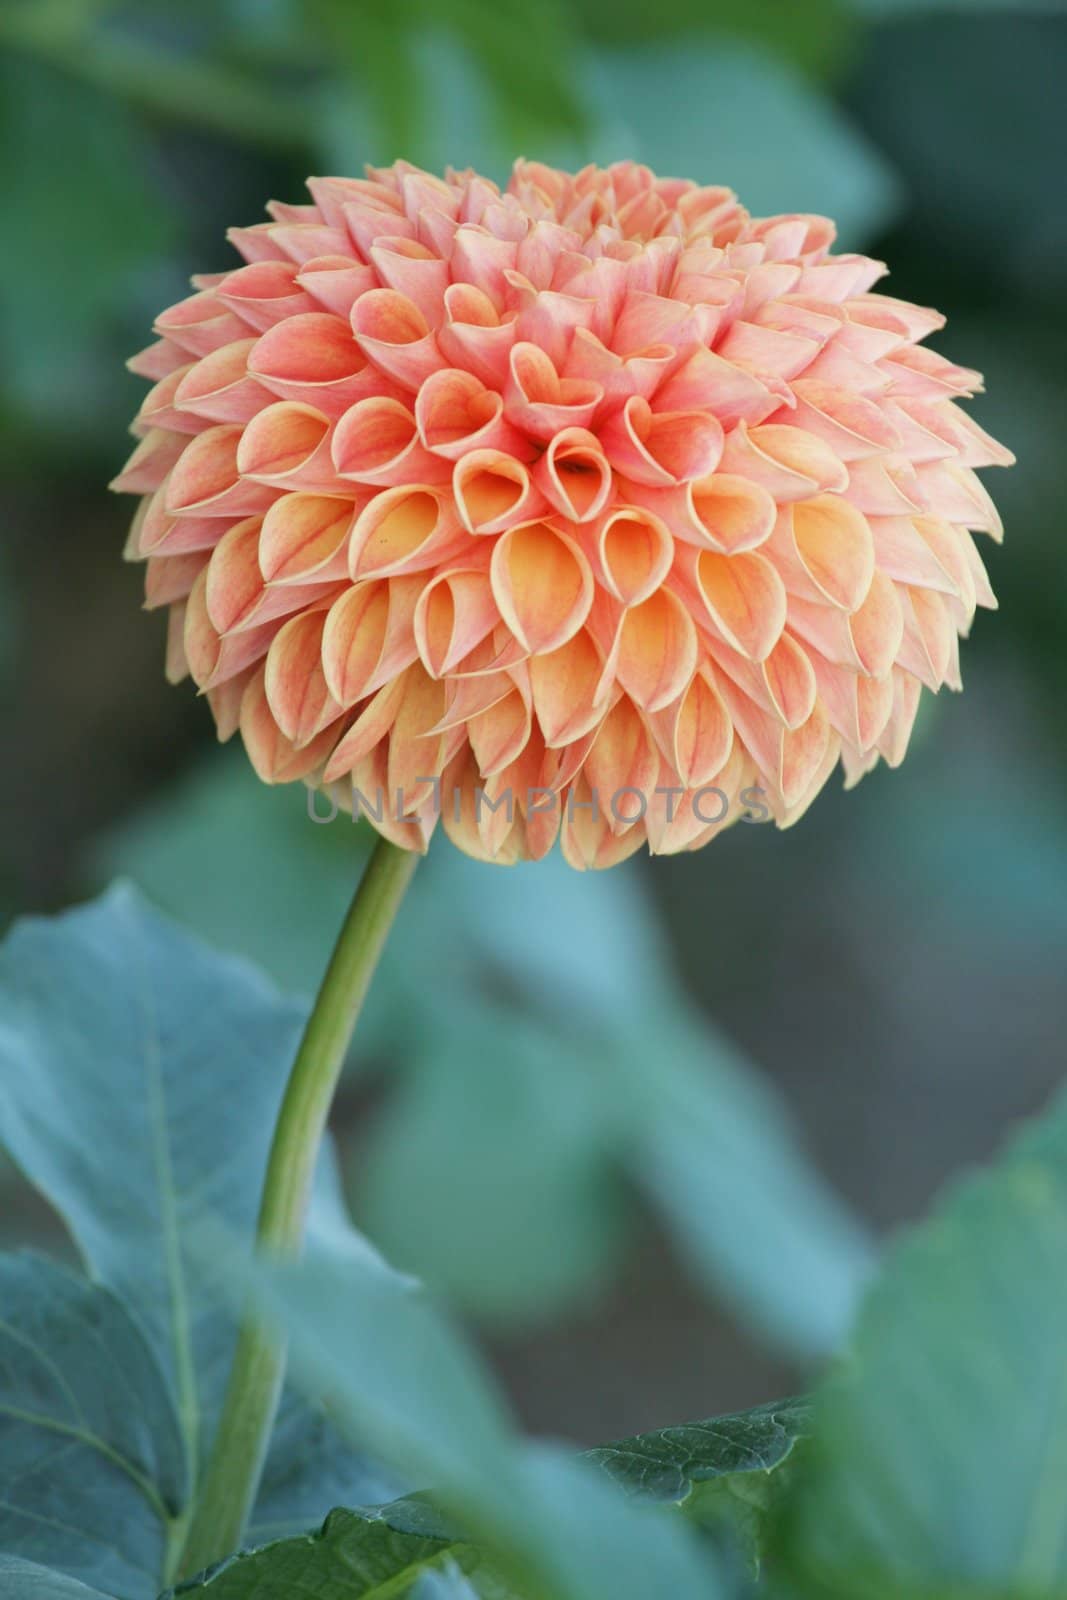 Perfectly formed peach colored dahlia by jarenwicklund